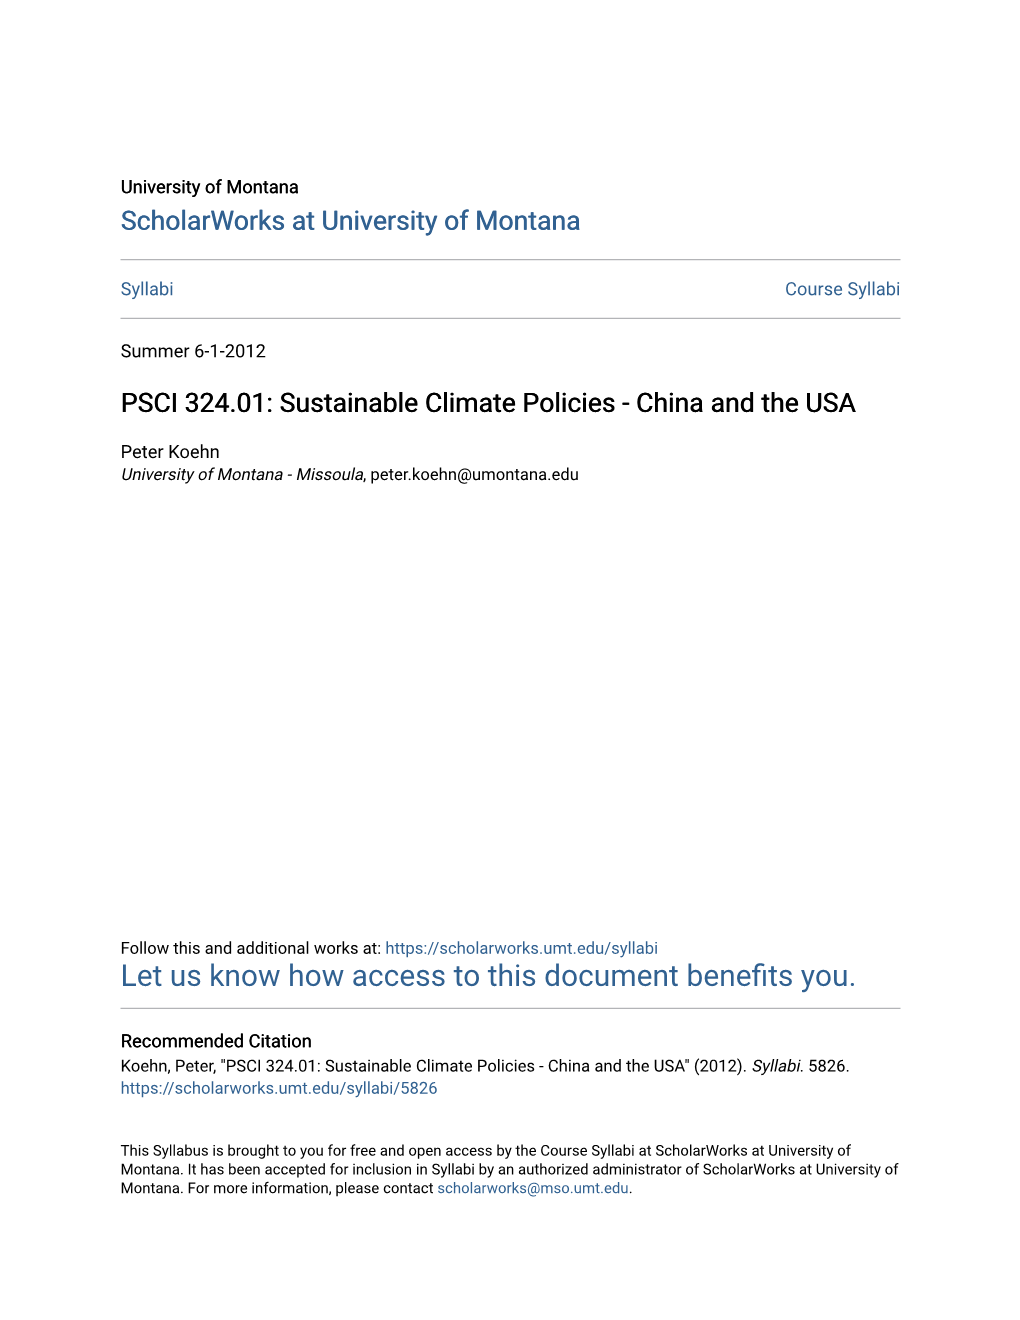 PSCI 324.01: Sustainable Climate Policies - China and the USA